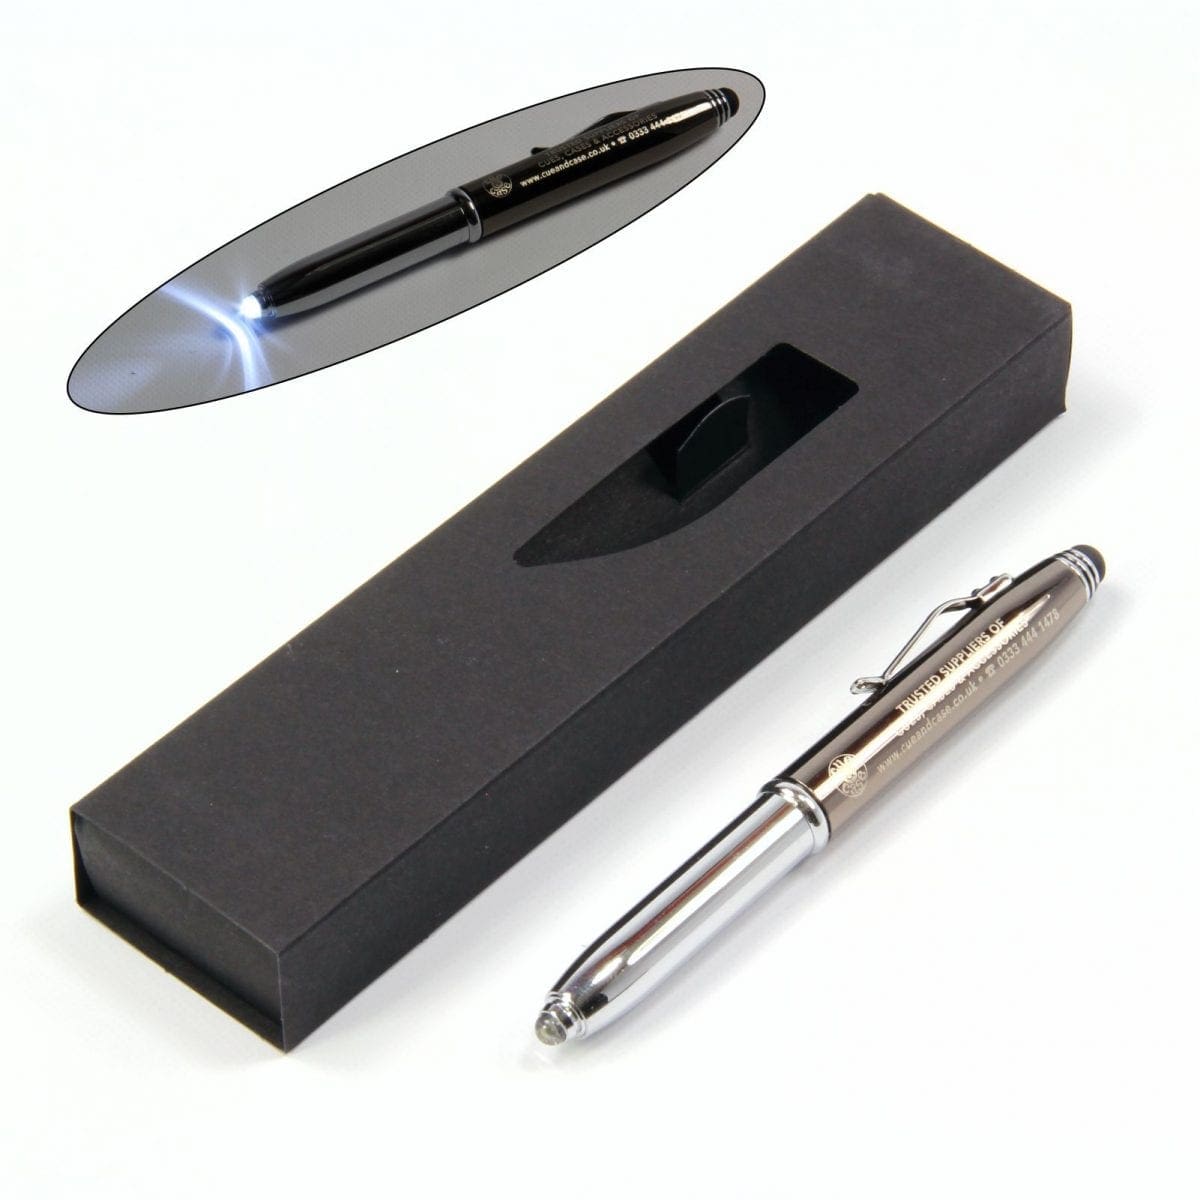 Cue & Case Quality Stainless Steel Pen & Stylus with Super Bright LED Light